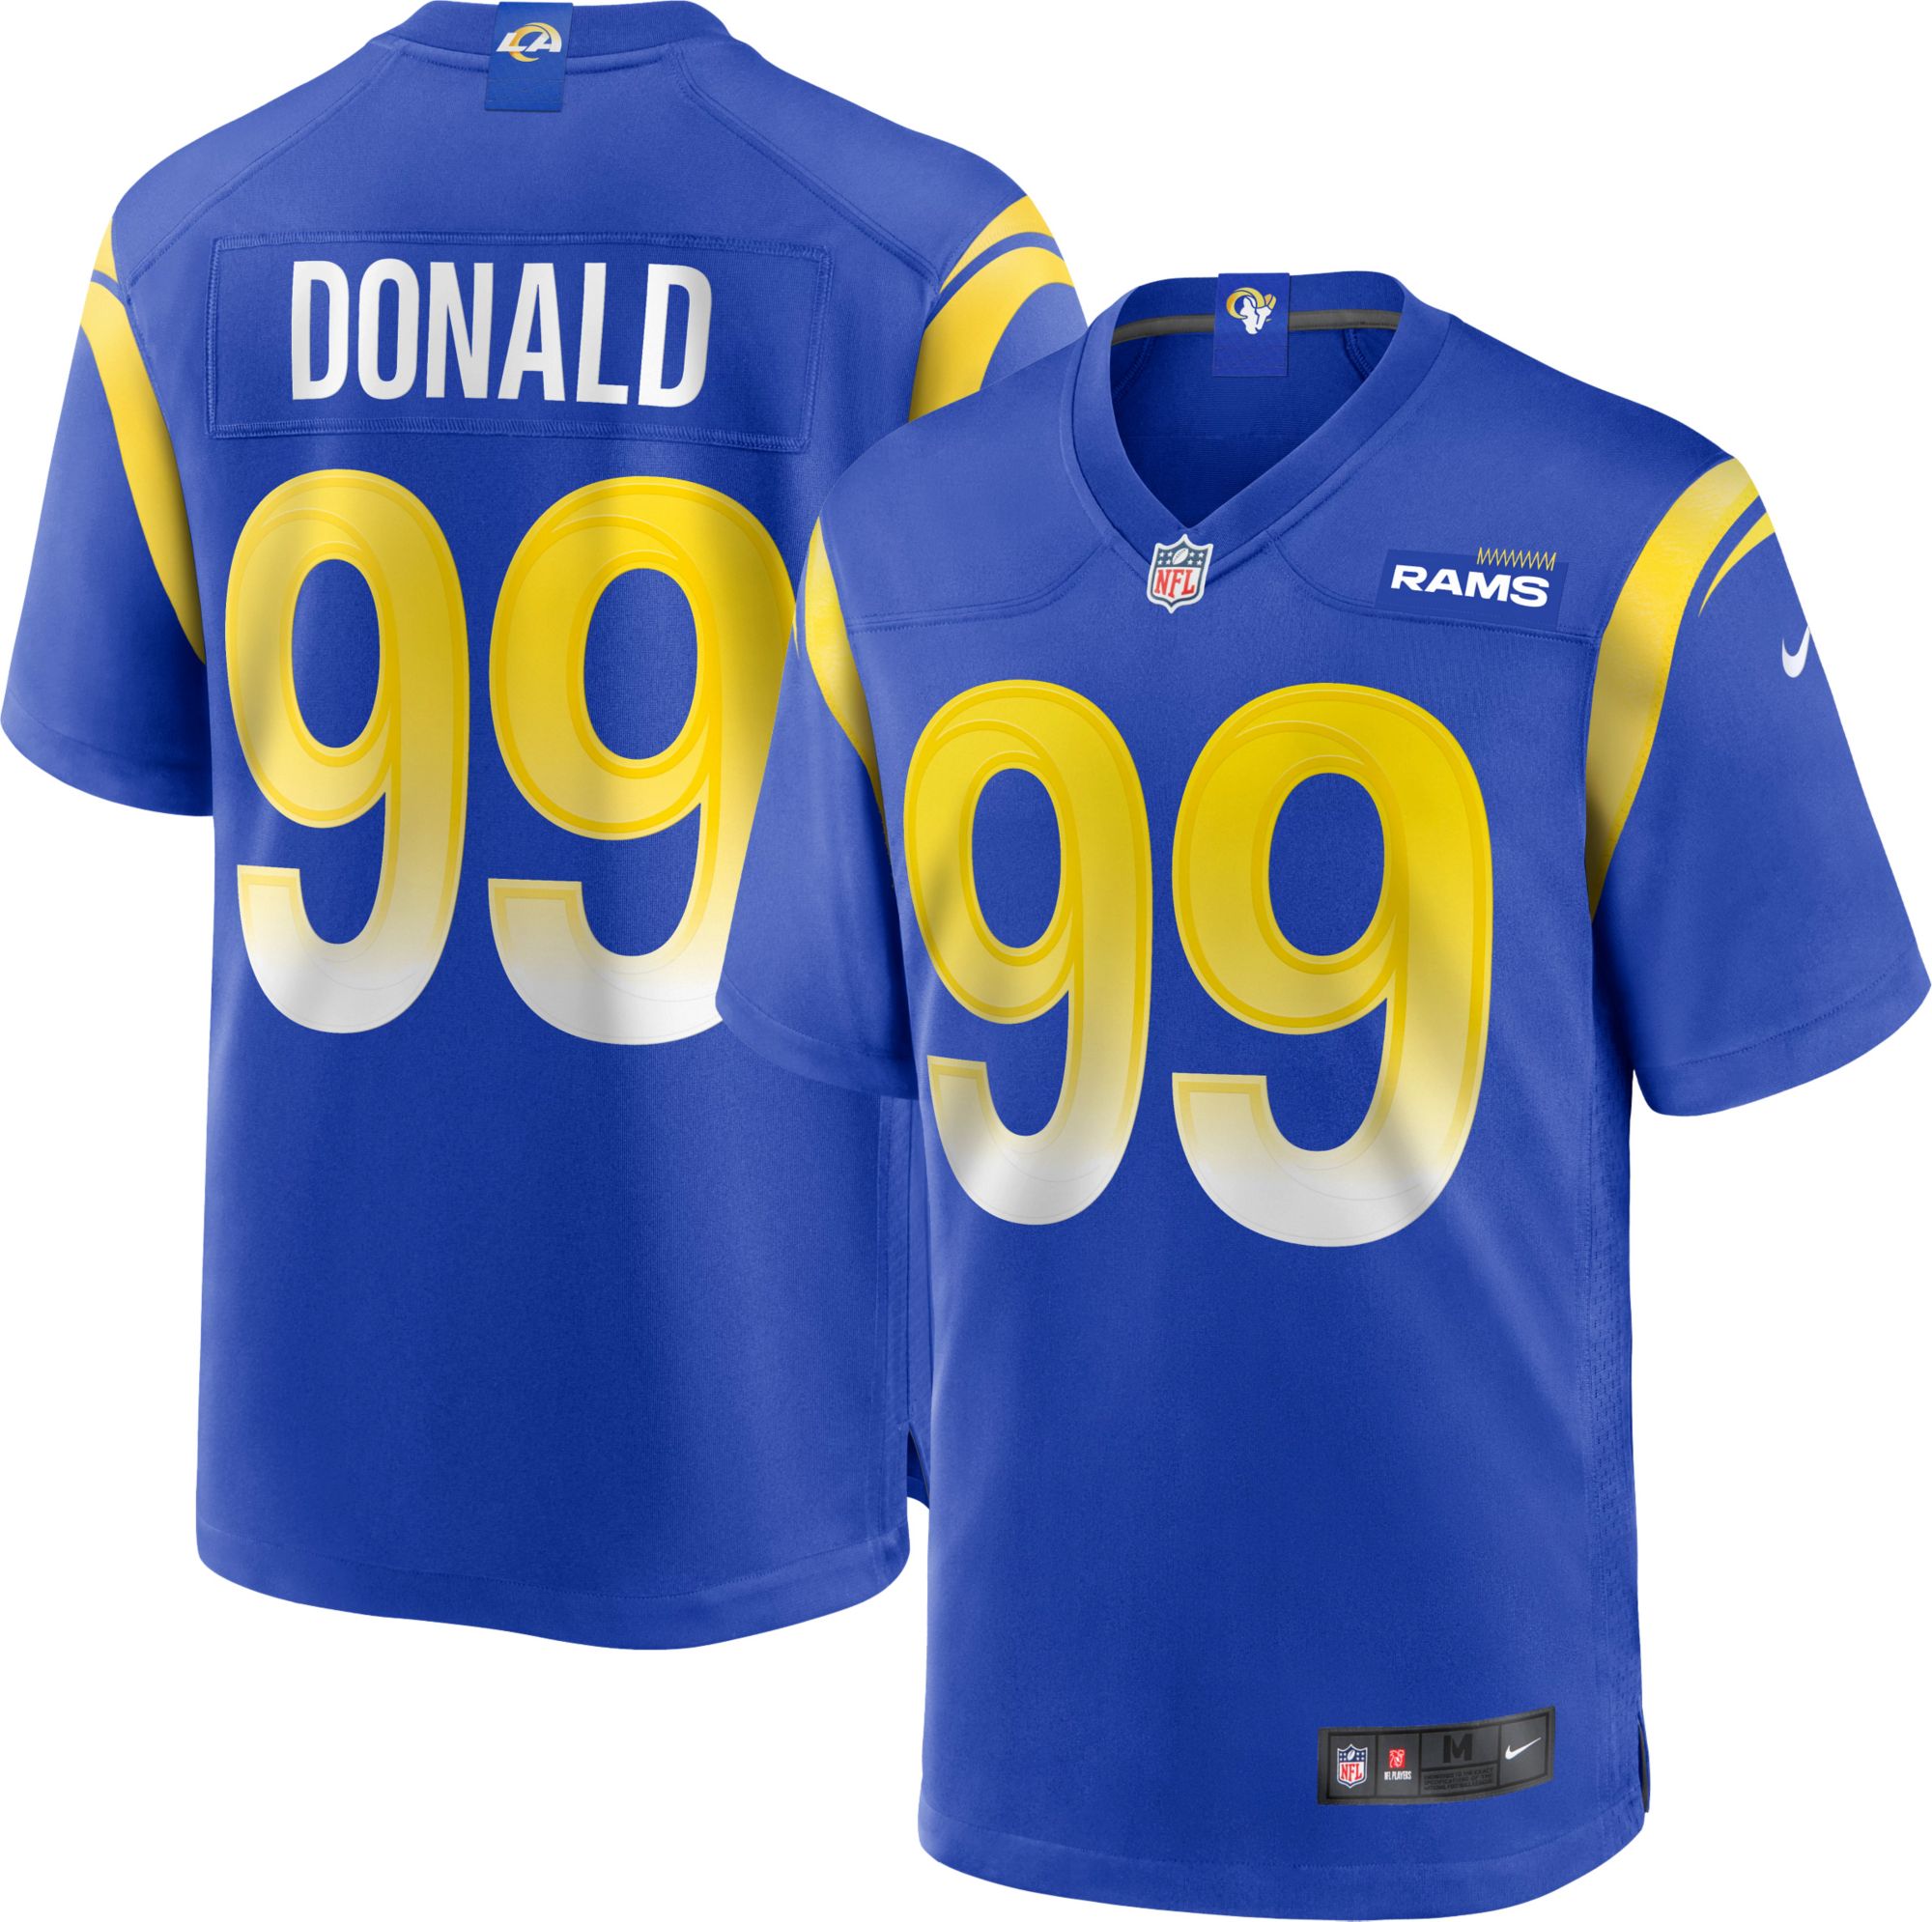 aaron donald jersey youth